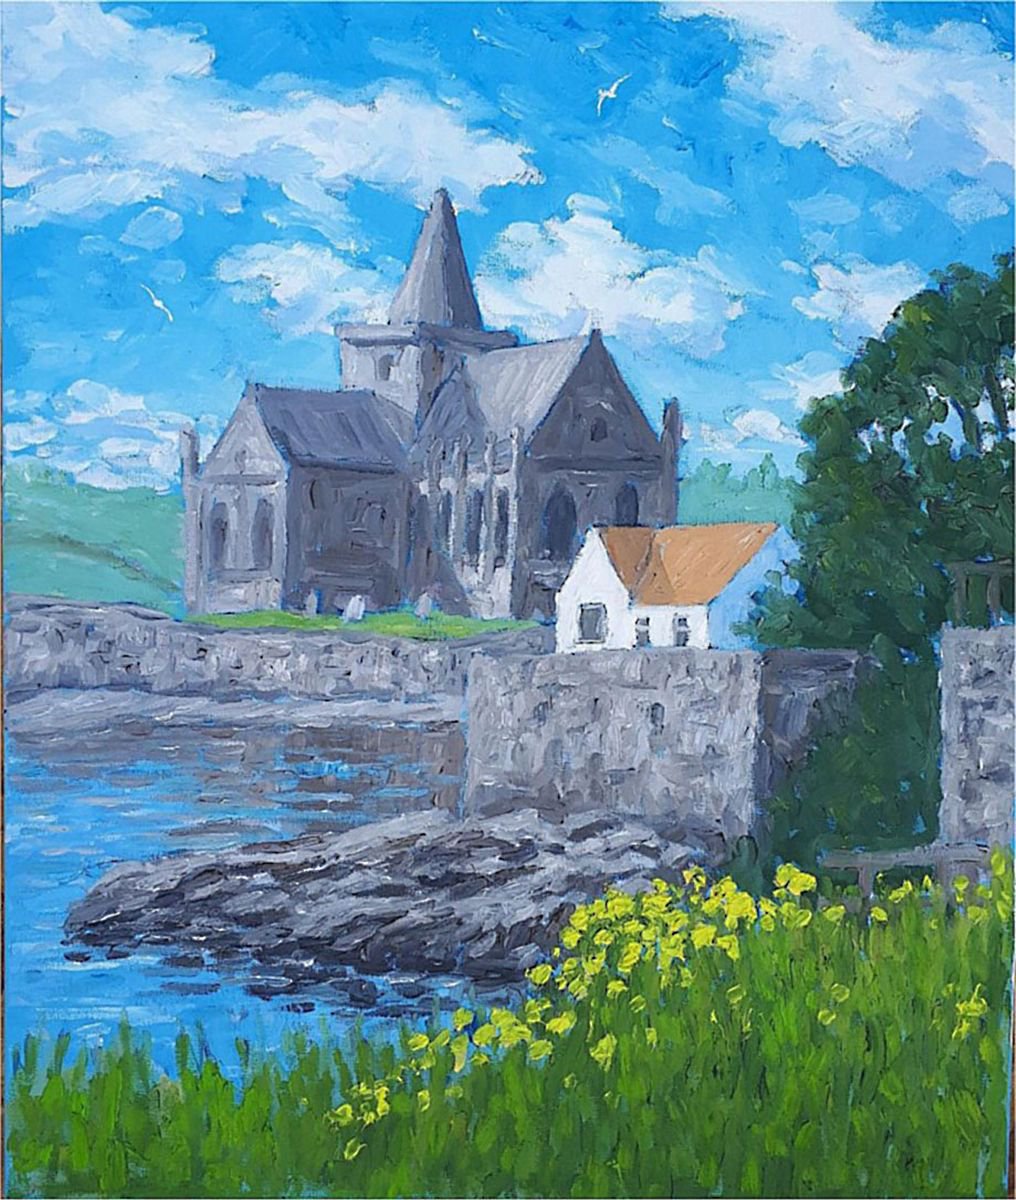 st monans kirk with yellow flowers by Colin Ross Jack